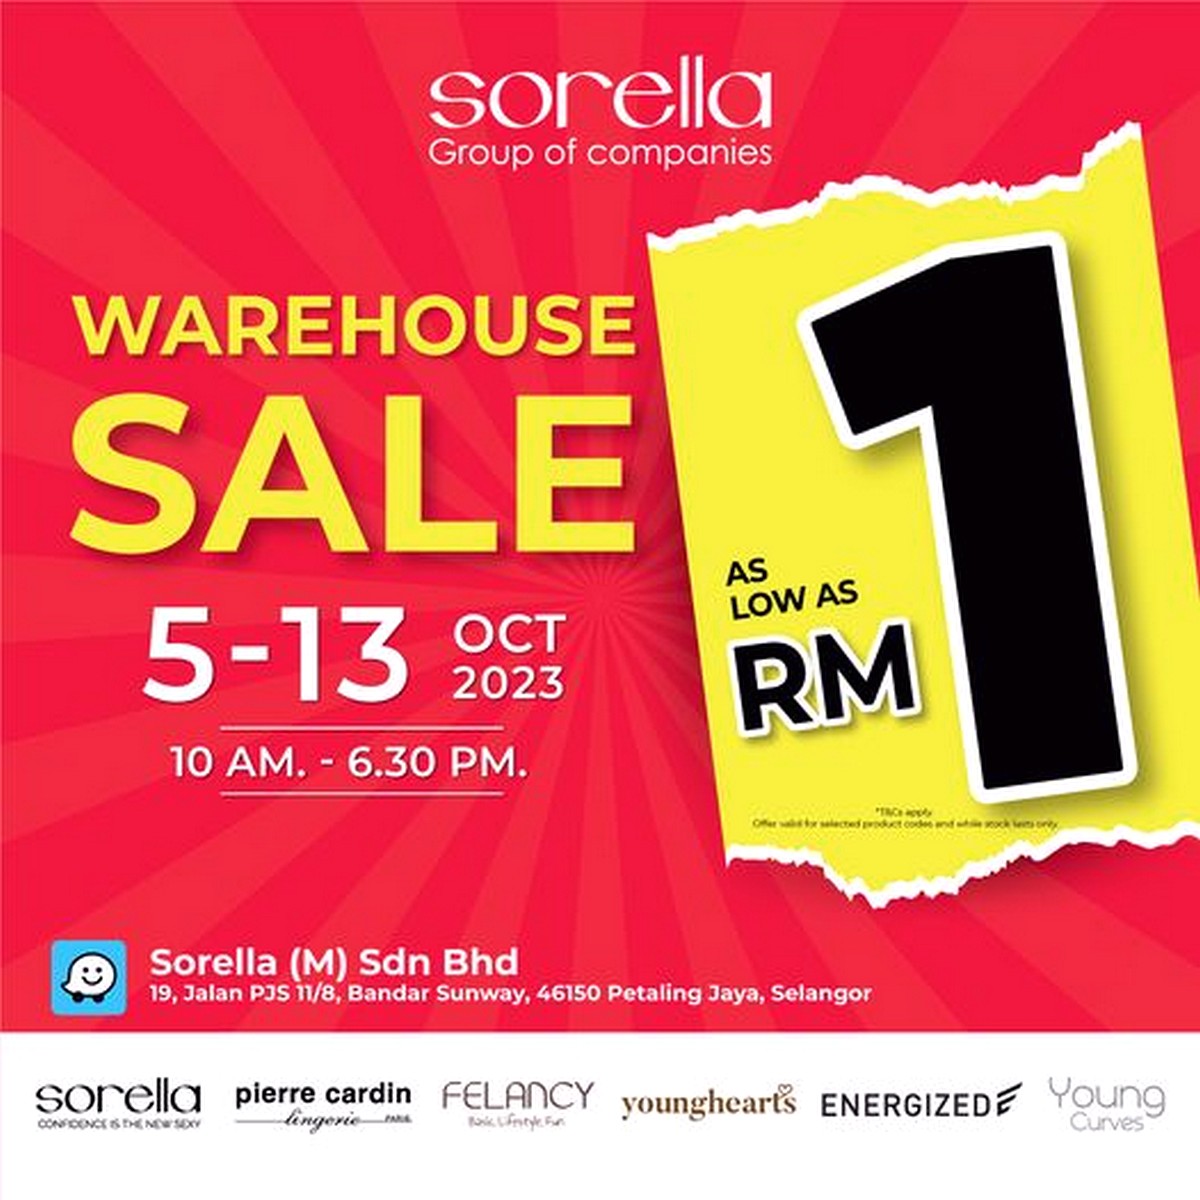 5-12 Oct 2023: Sorella Warehouse Sale! Price as low as RM1 only